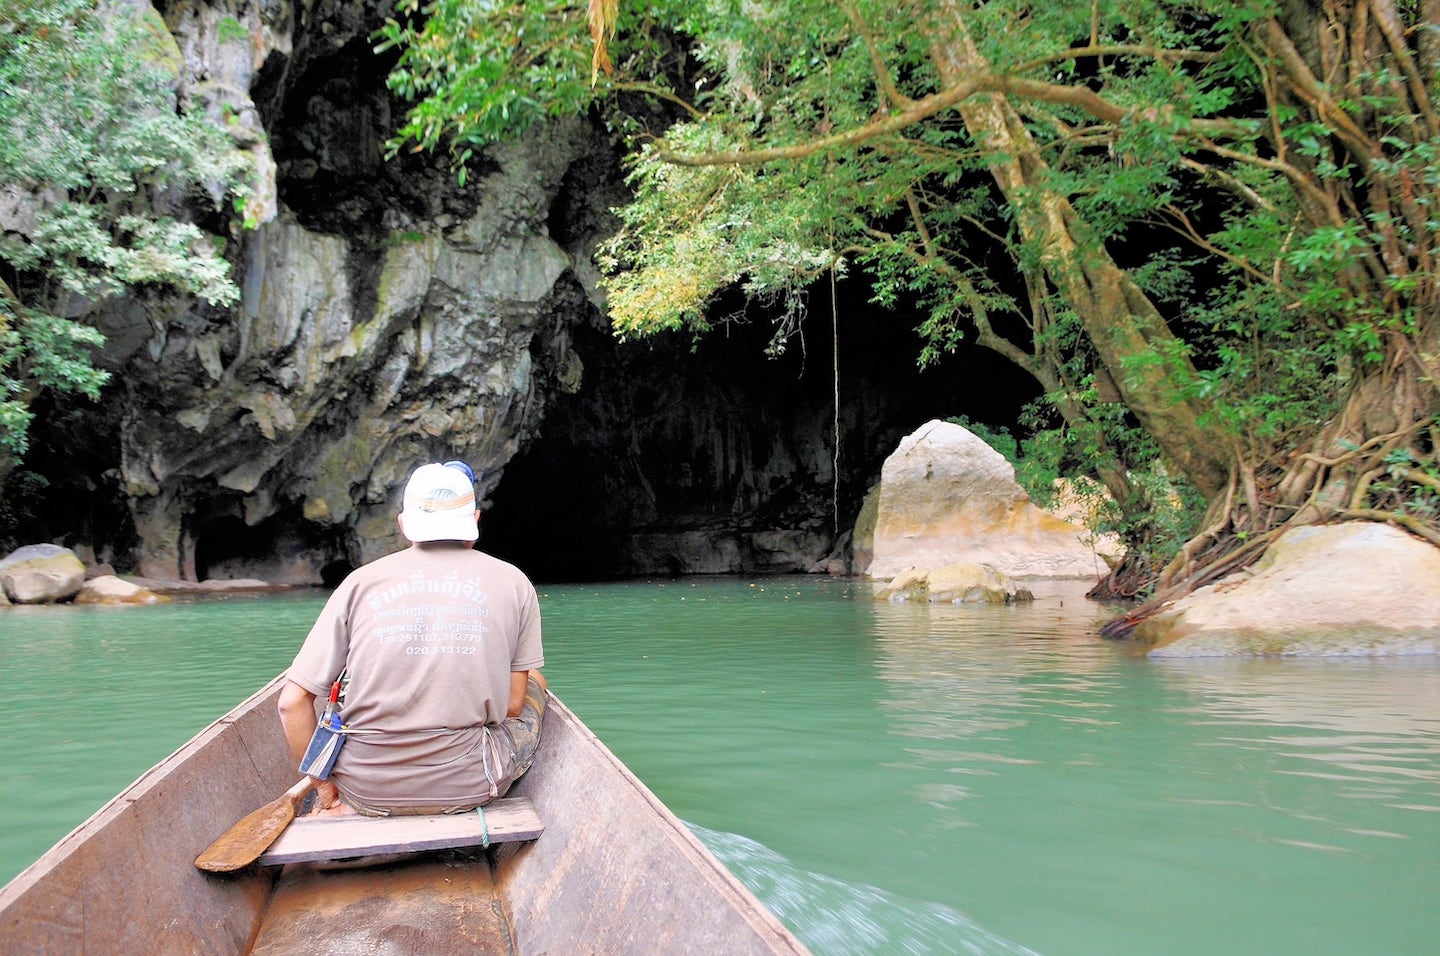 man on boat near water cave